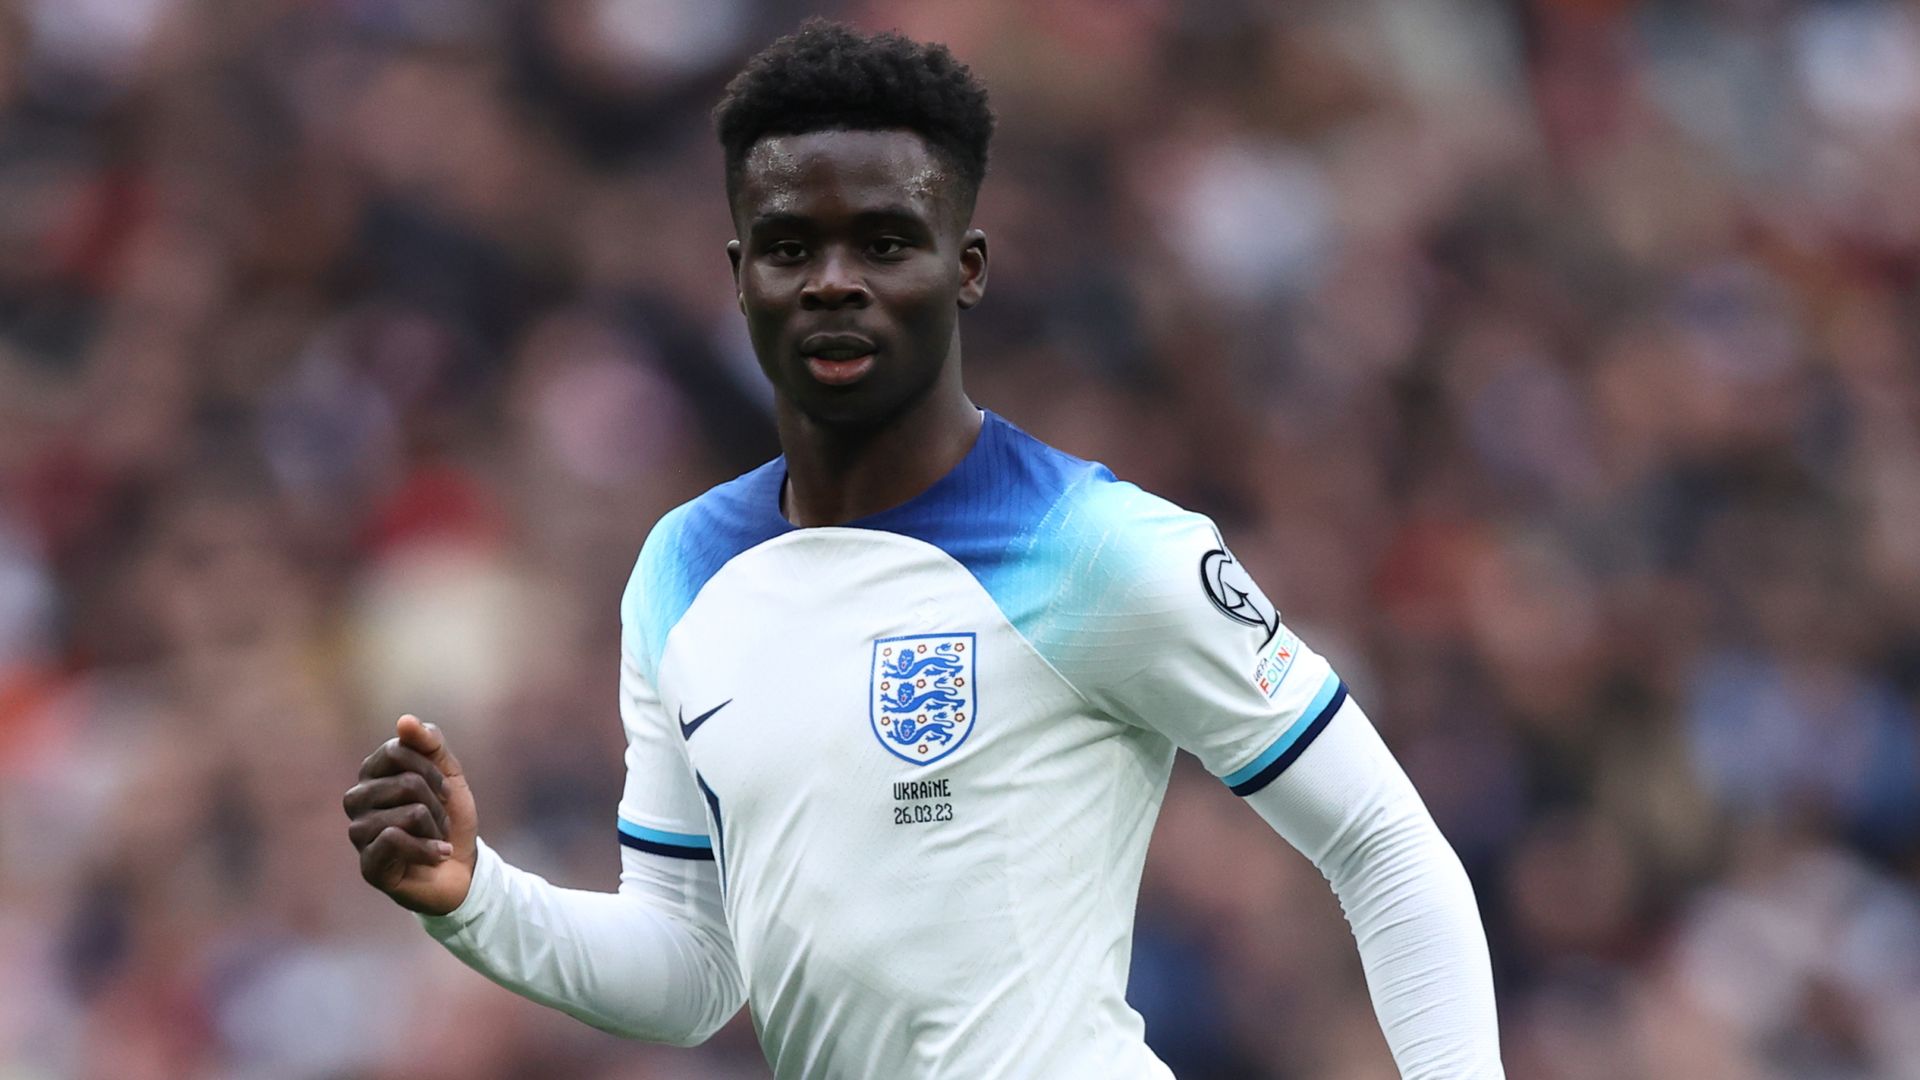 Southgate: Saka mentality shift has helped him become top player